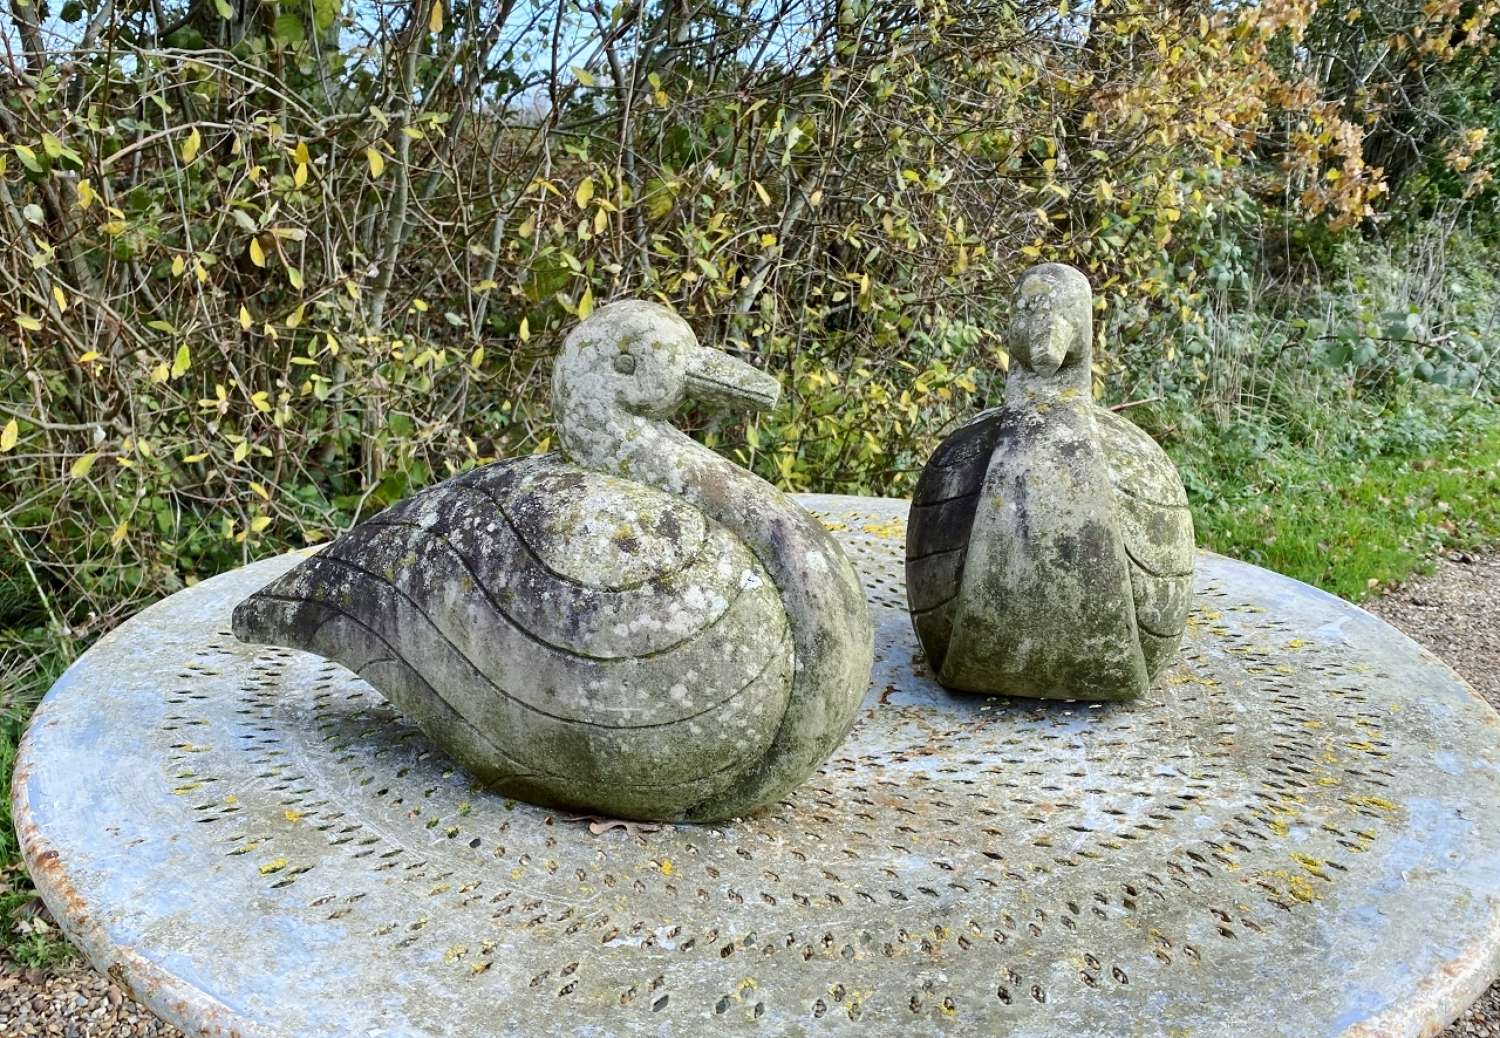 Pair of Carved Stone Ducks